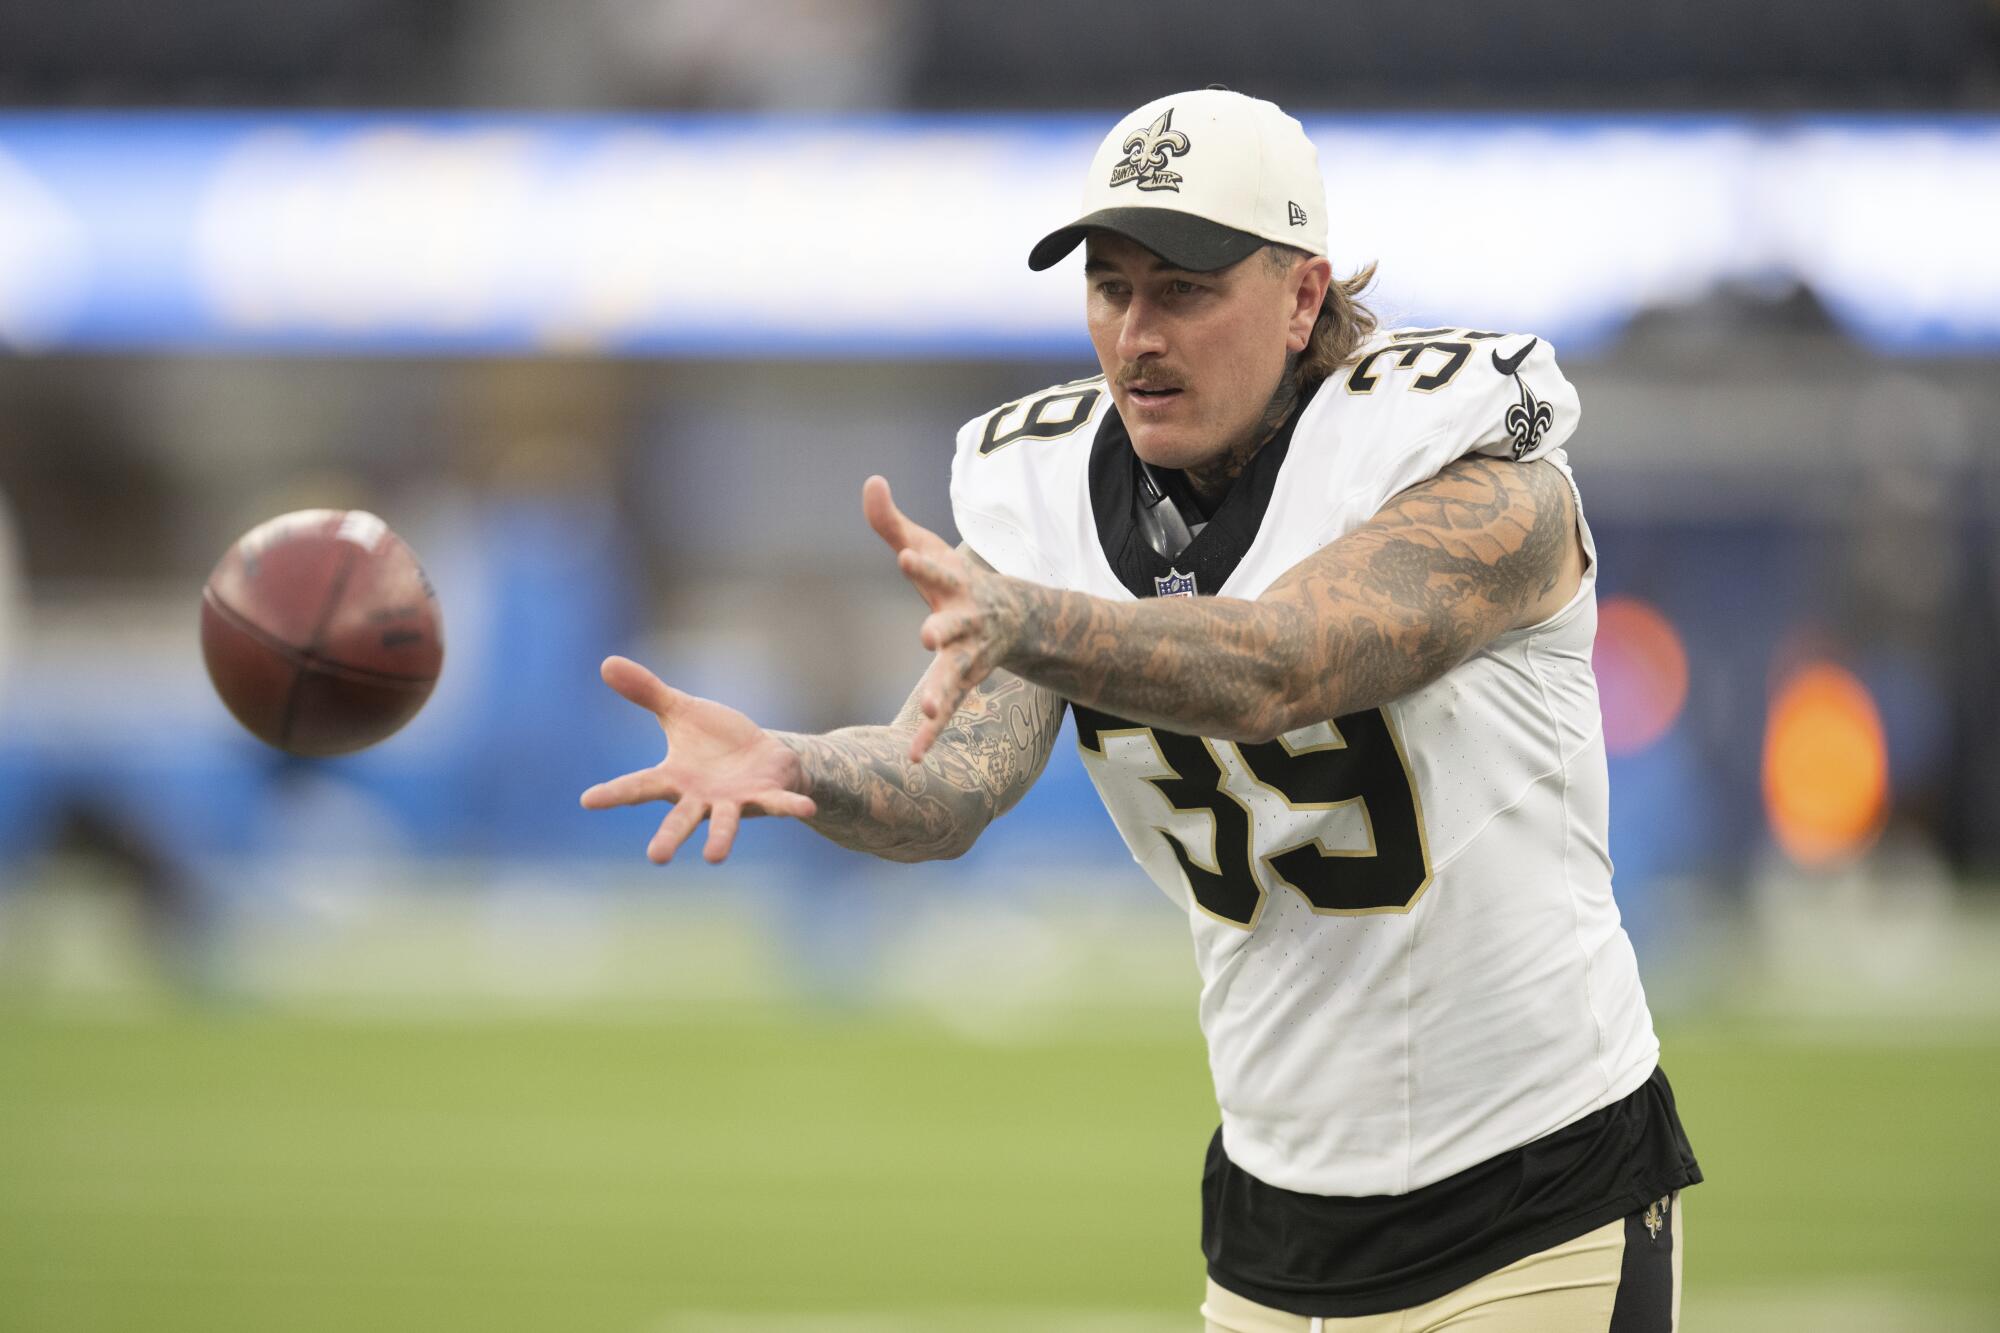 Saints punter Lou Hedley extends his hands to catch a football, warming up before a preseason game against the Chargers